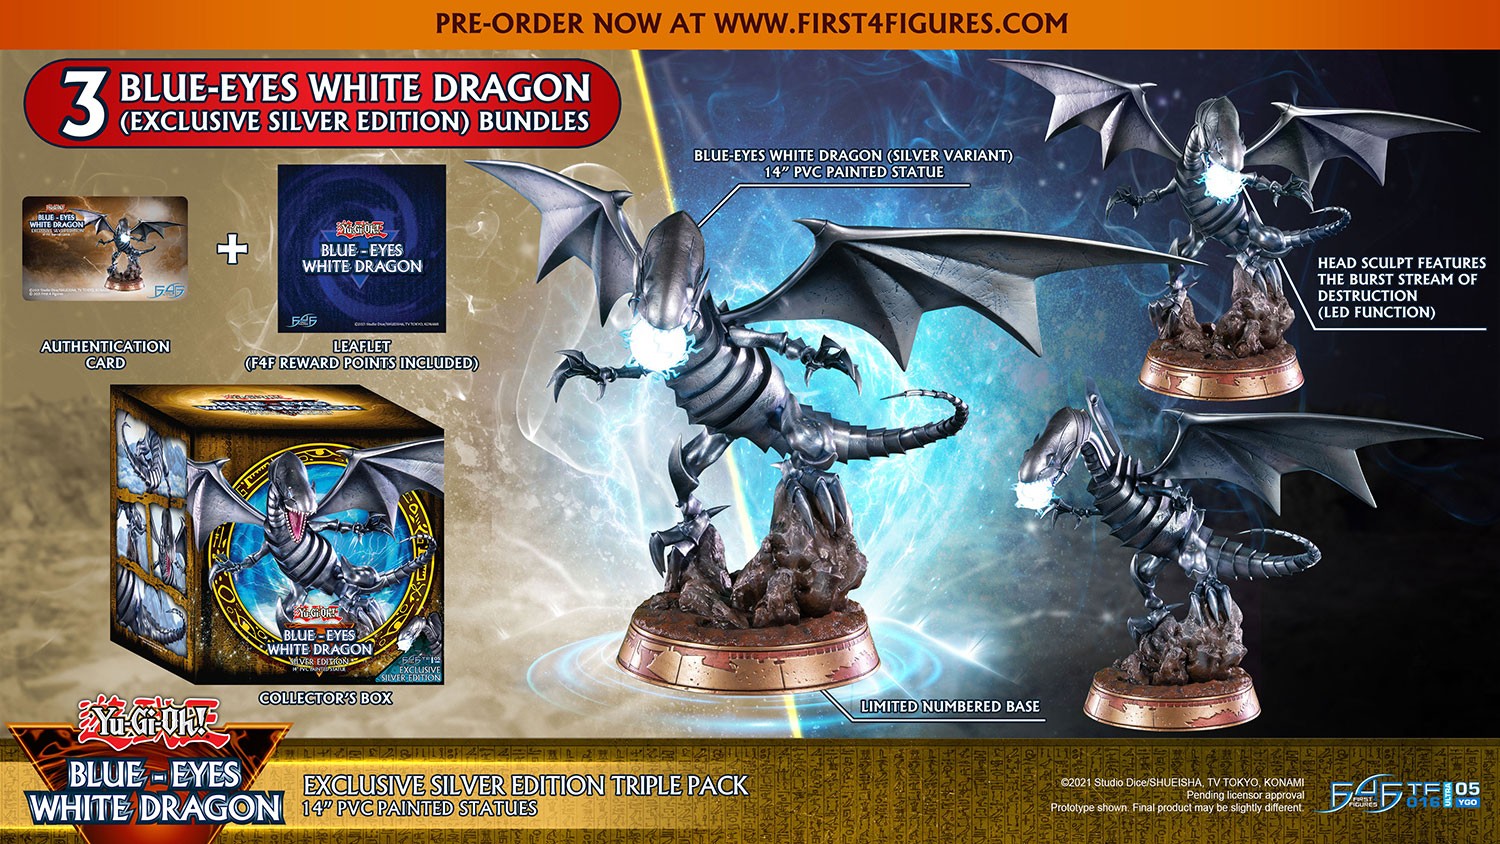 Yu-Gi-Oh! – Blue-Eyes White Dragon (Exclusive Silver Edition Triple Pack)